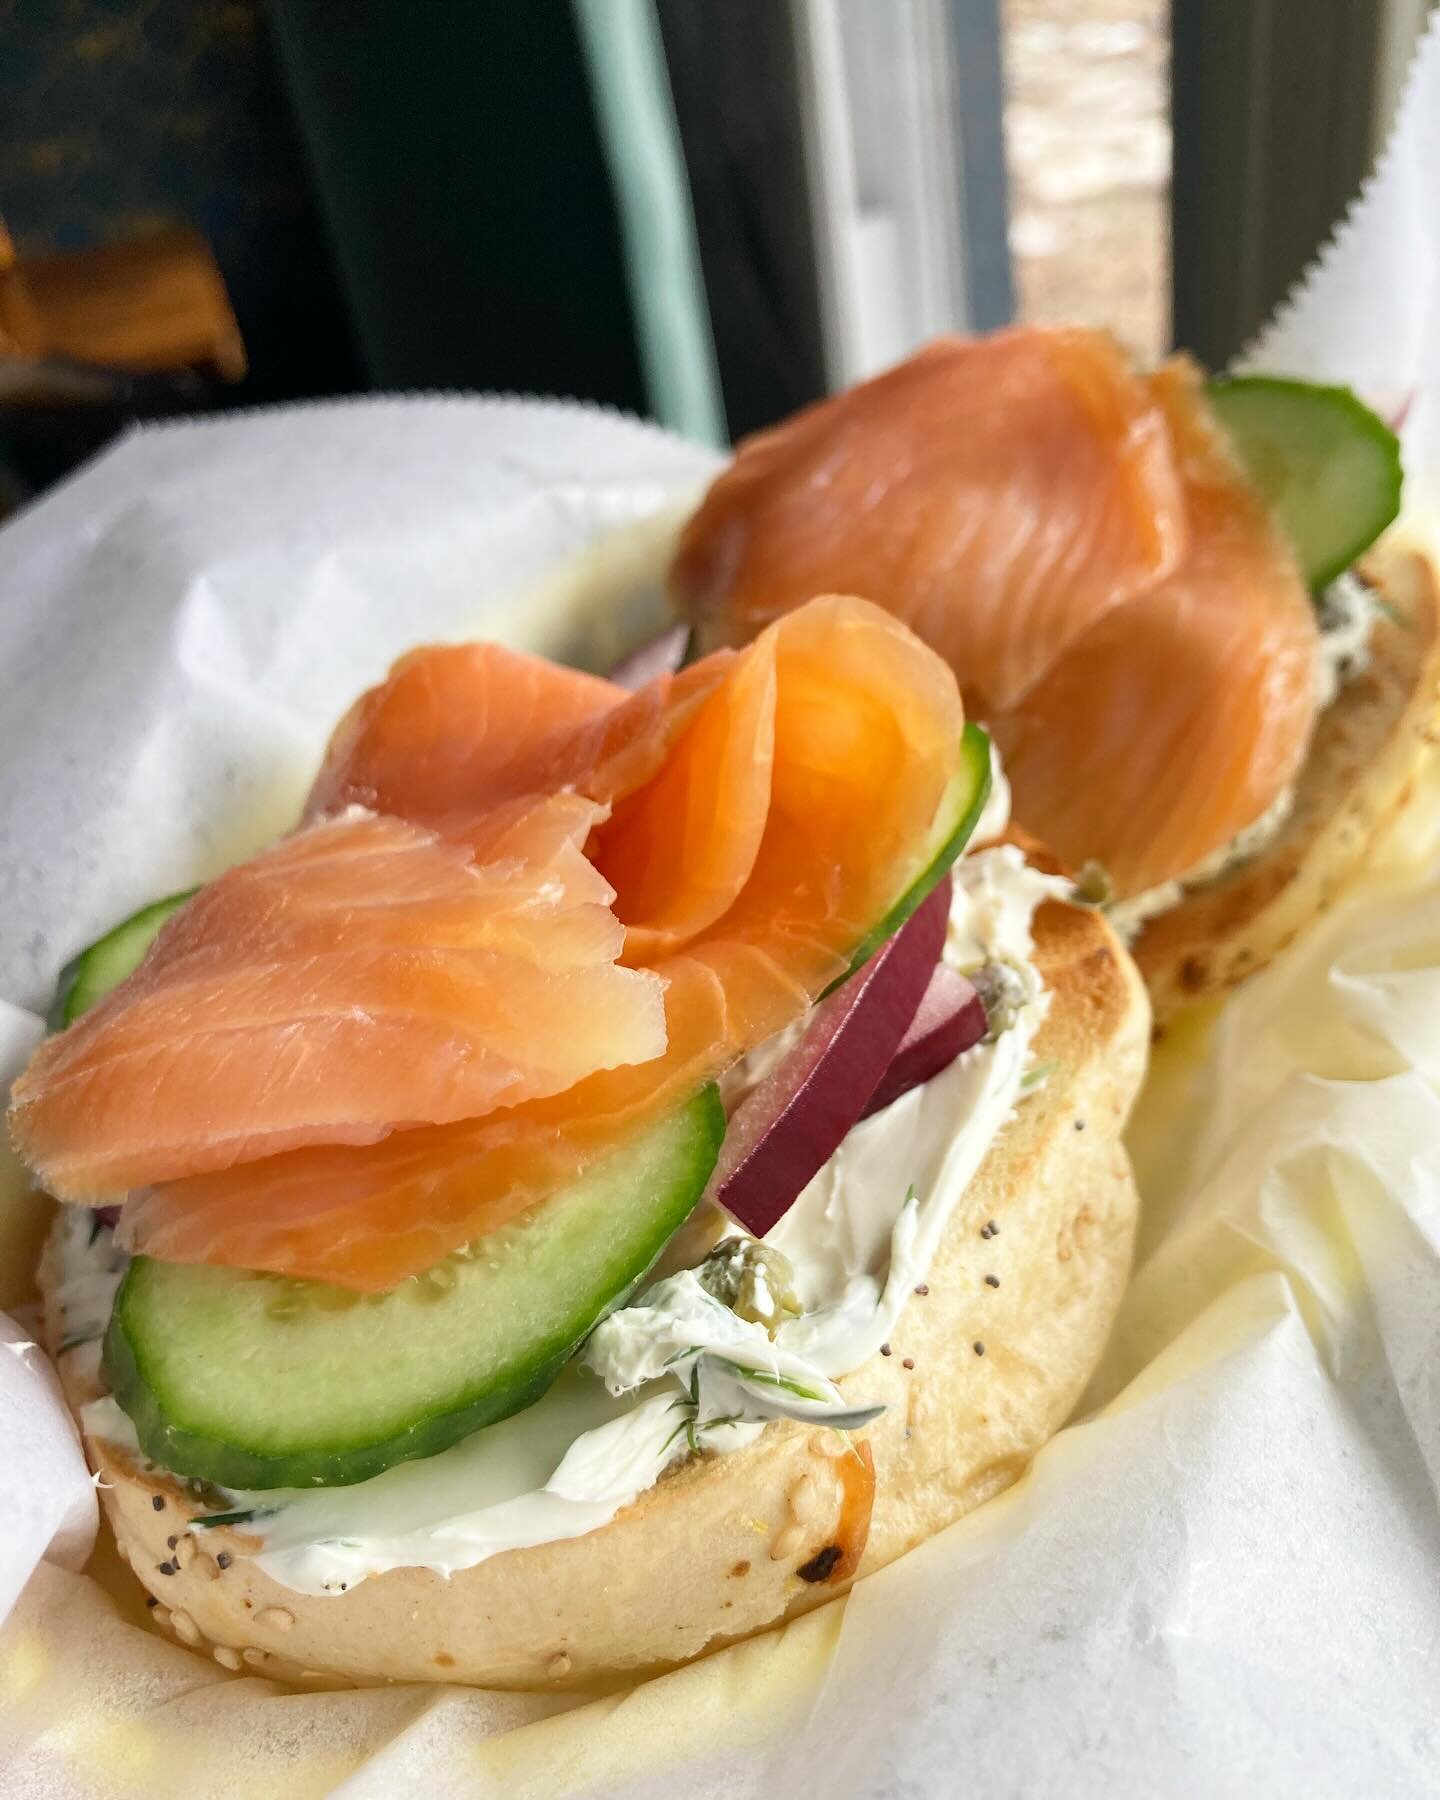 🌟 Special this week🌟 
Smoked salmon, caper-dill cream cheese, cucumbers and red onion on an OMG bagel 🥯 🐟 

#maineeats #207 #mainebreakfast